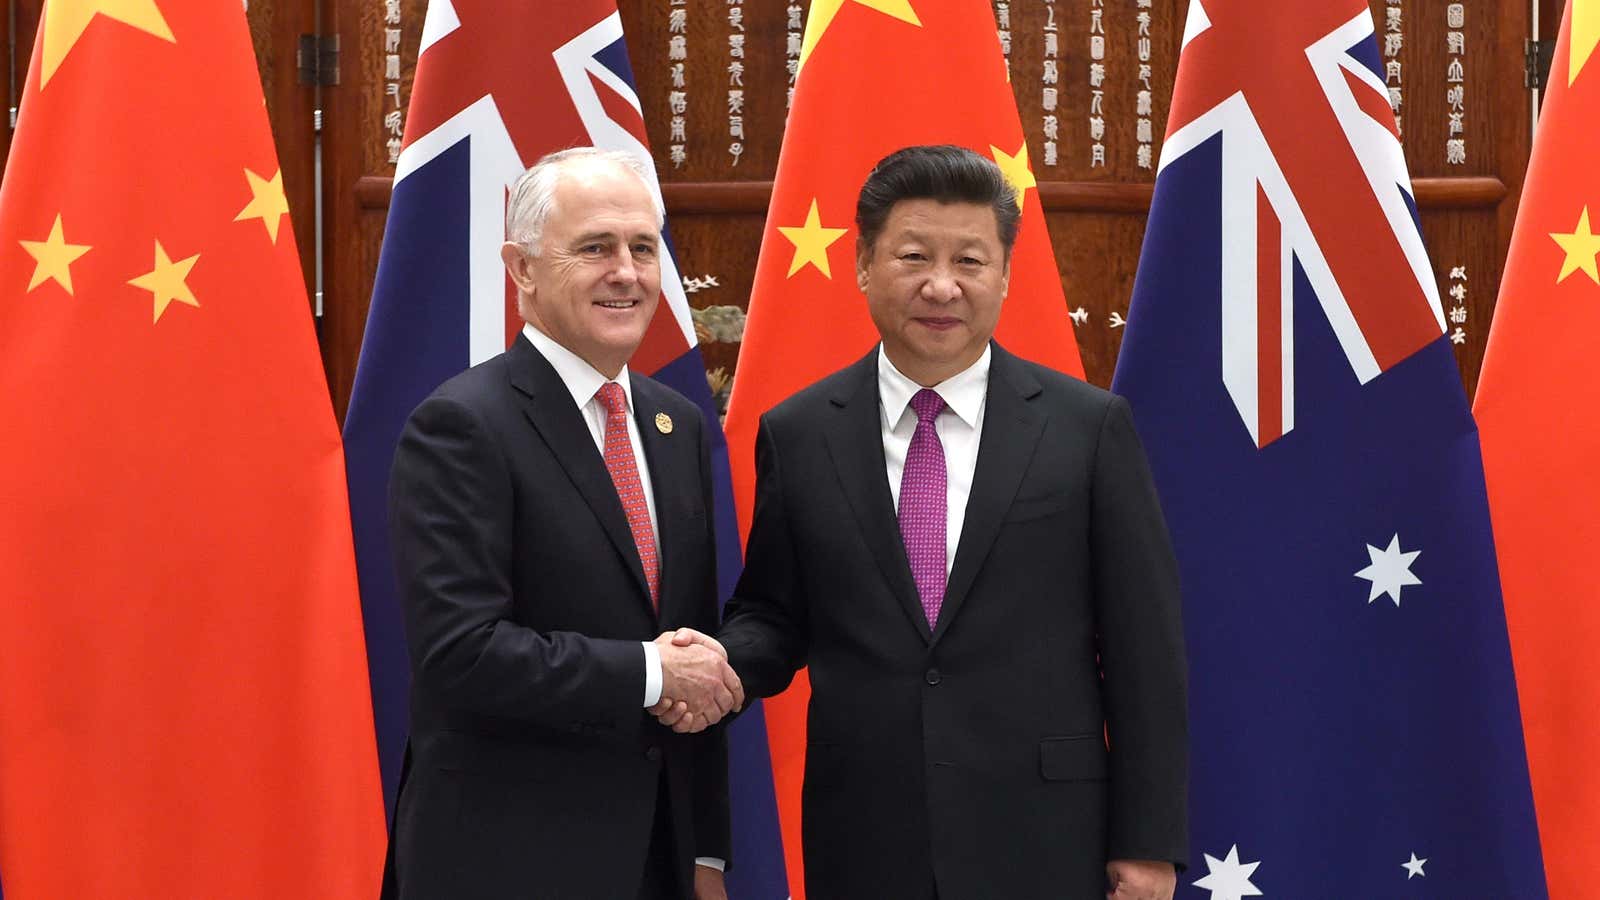 Australian Prime Minister Malcolm Turnbull, left, poses with Chinese President Xi Jinping for a photo at the West Lake State Guest House in Hangzhou, China,…